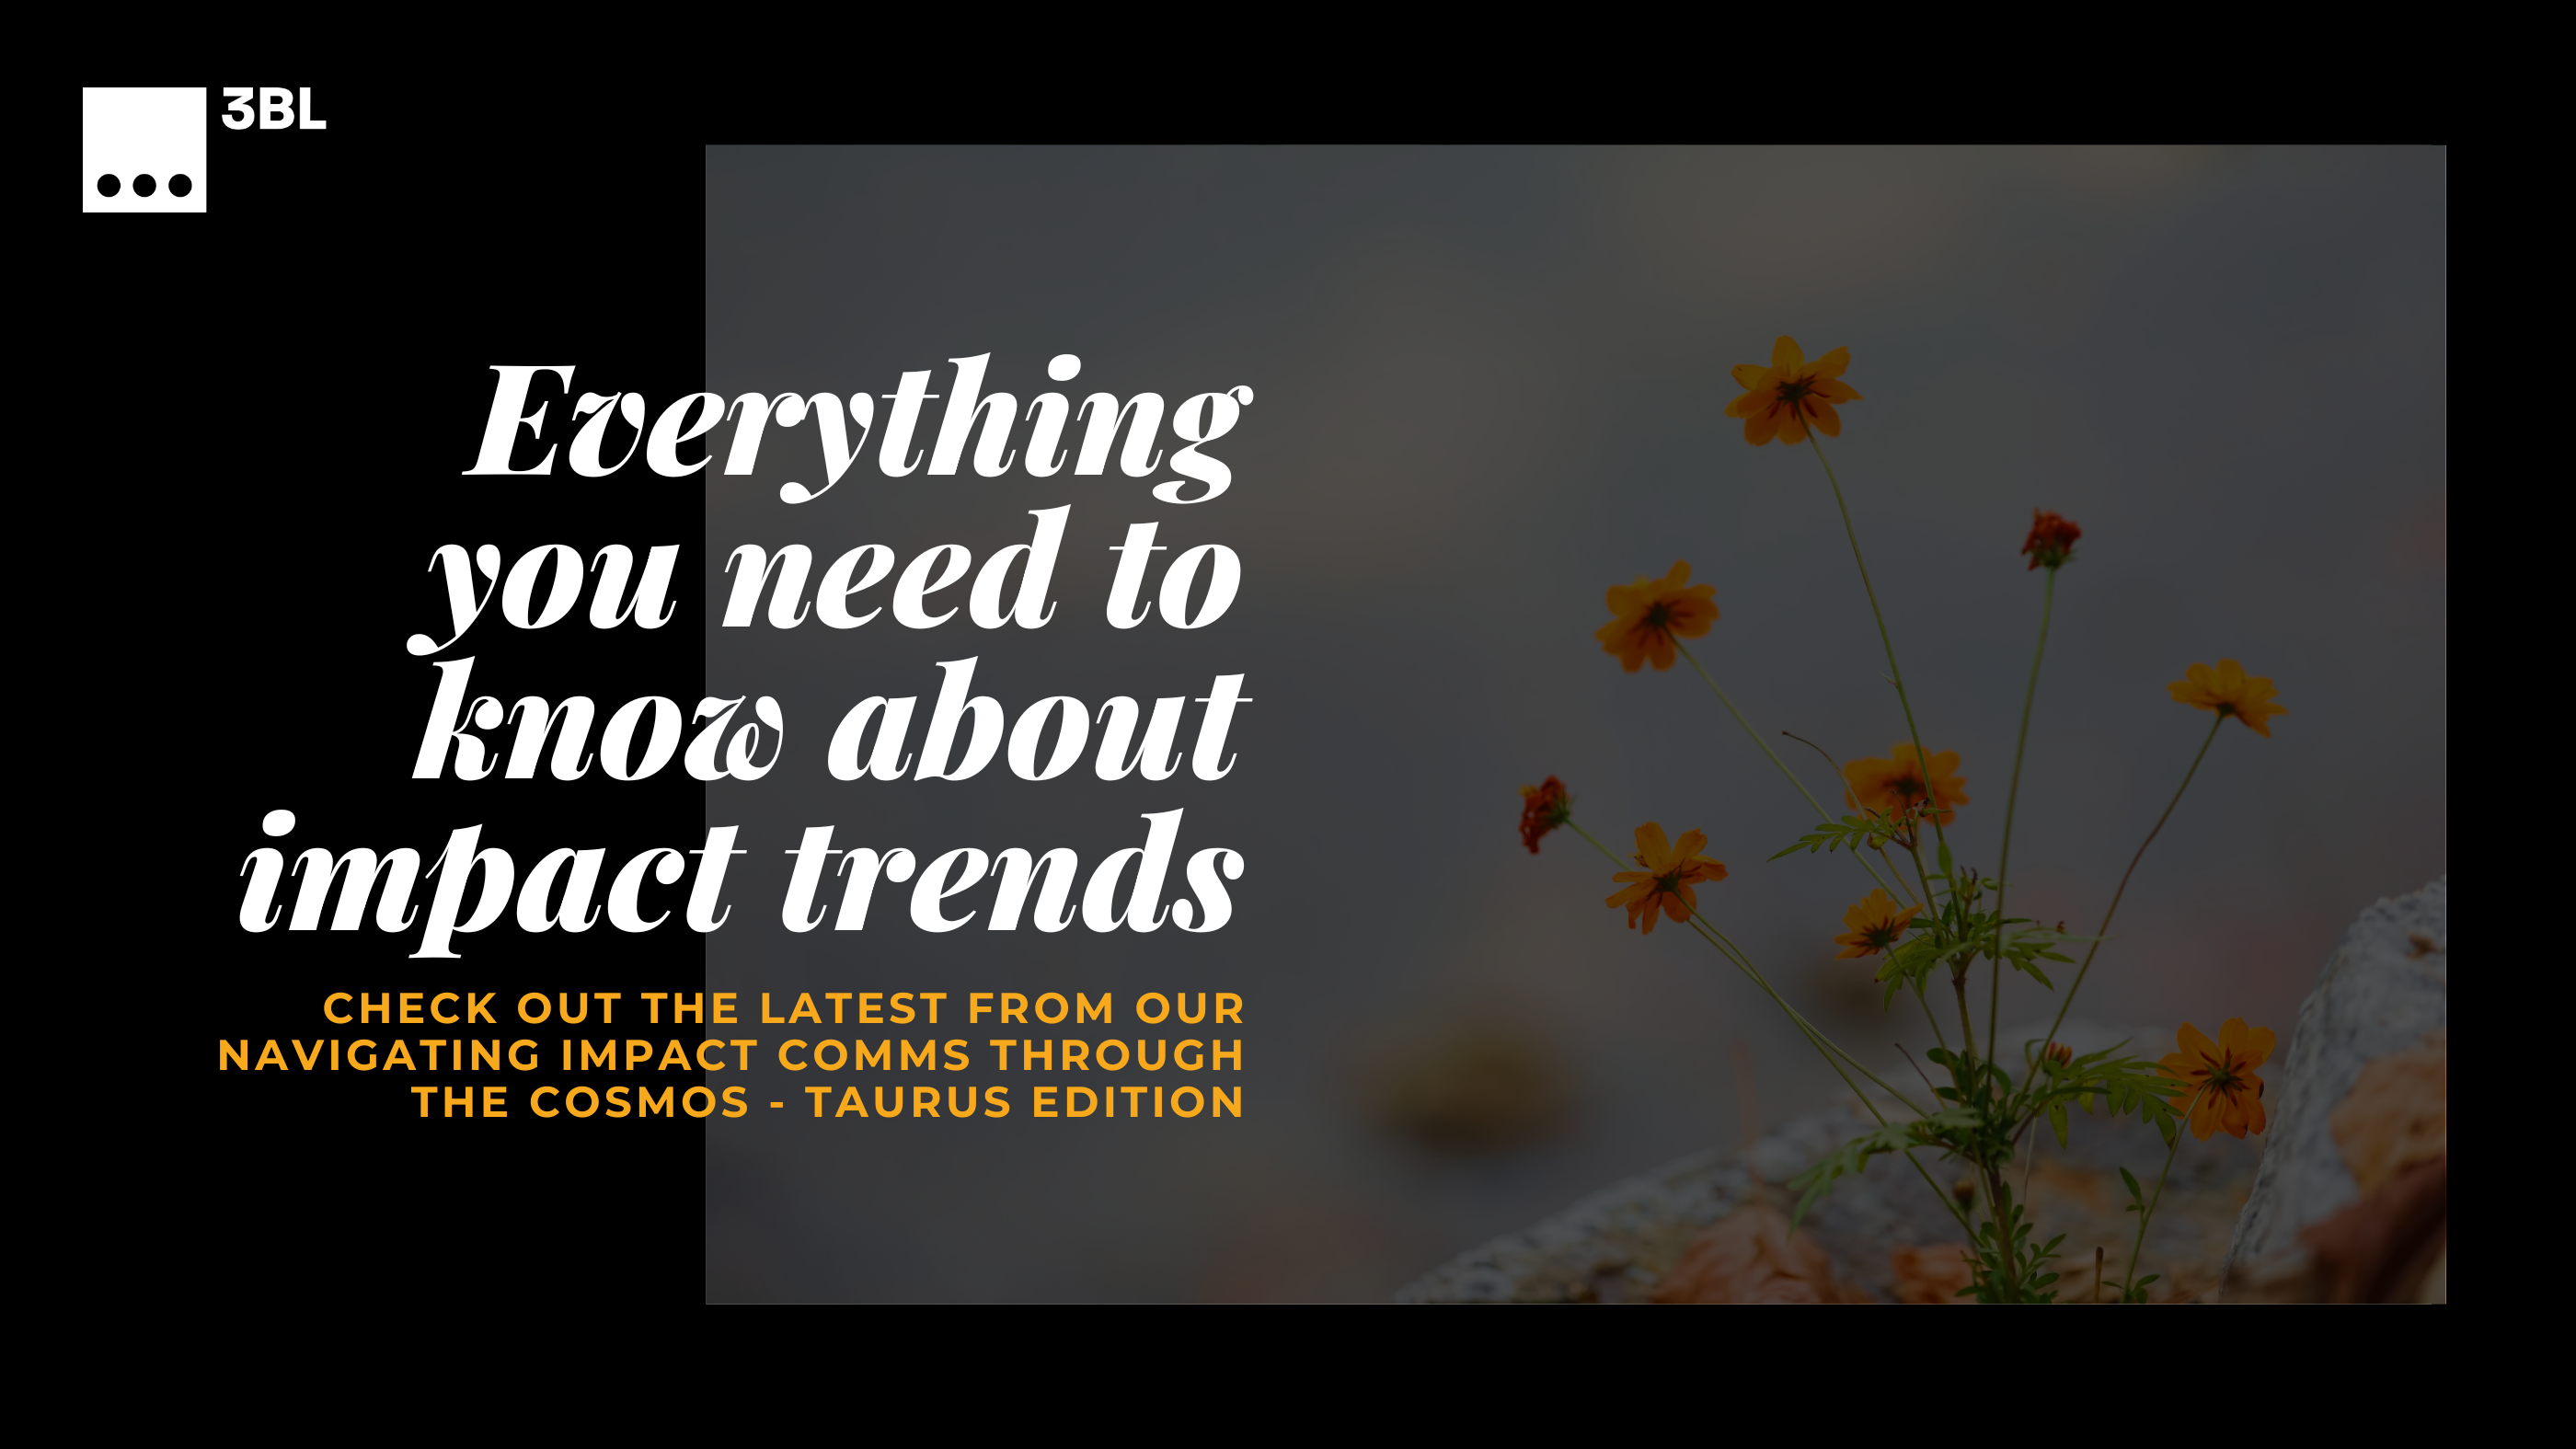 Everything you need to know about impact trends: check out the latest from our Navigating Impact comms through the Cosmos - Taurus Edition